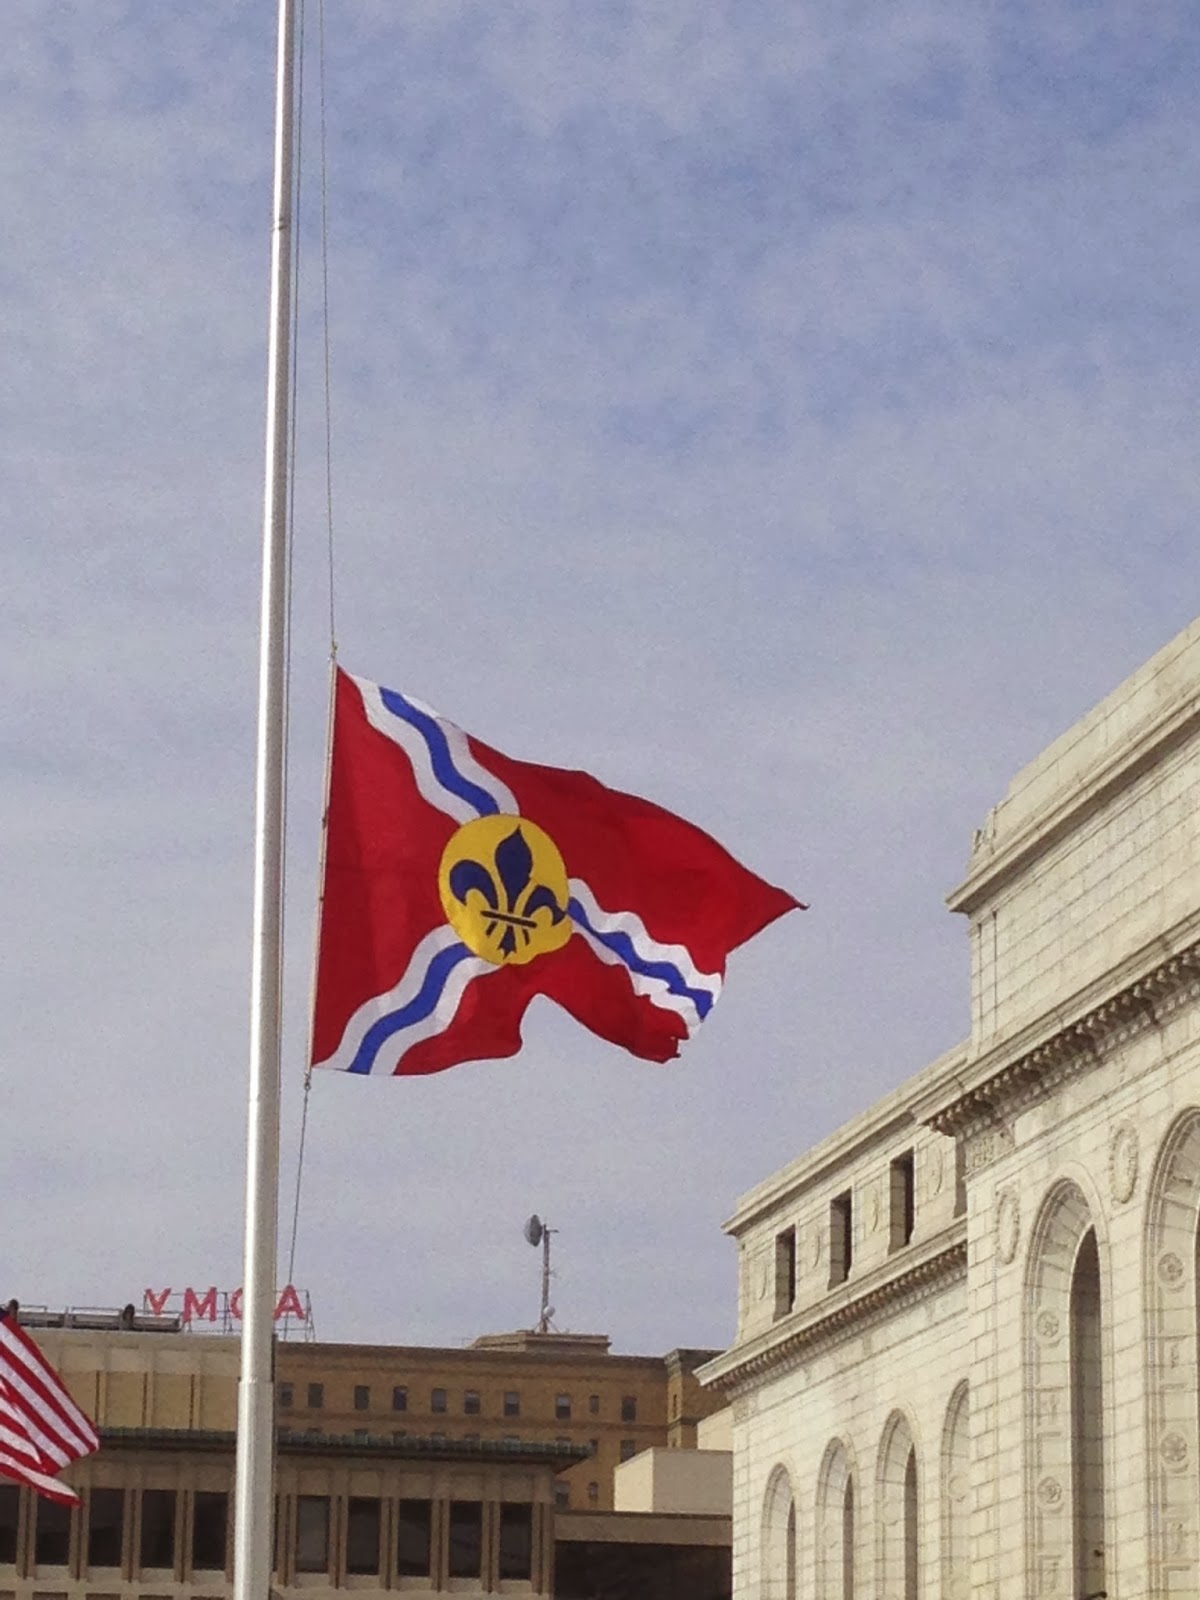 Three Flags, The flags of the City of St. Louis, the United…